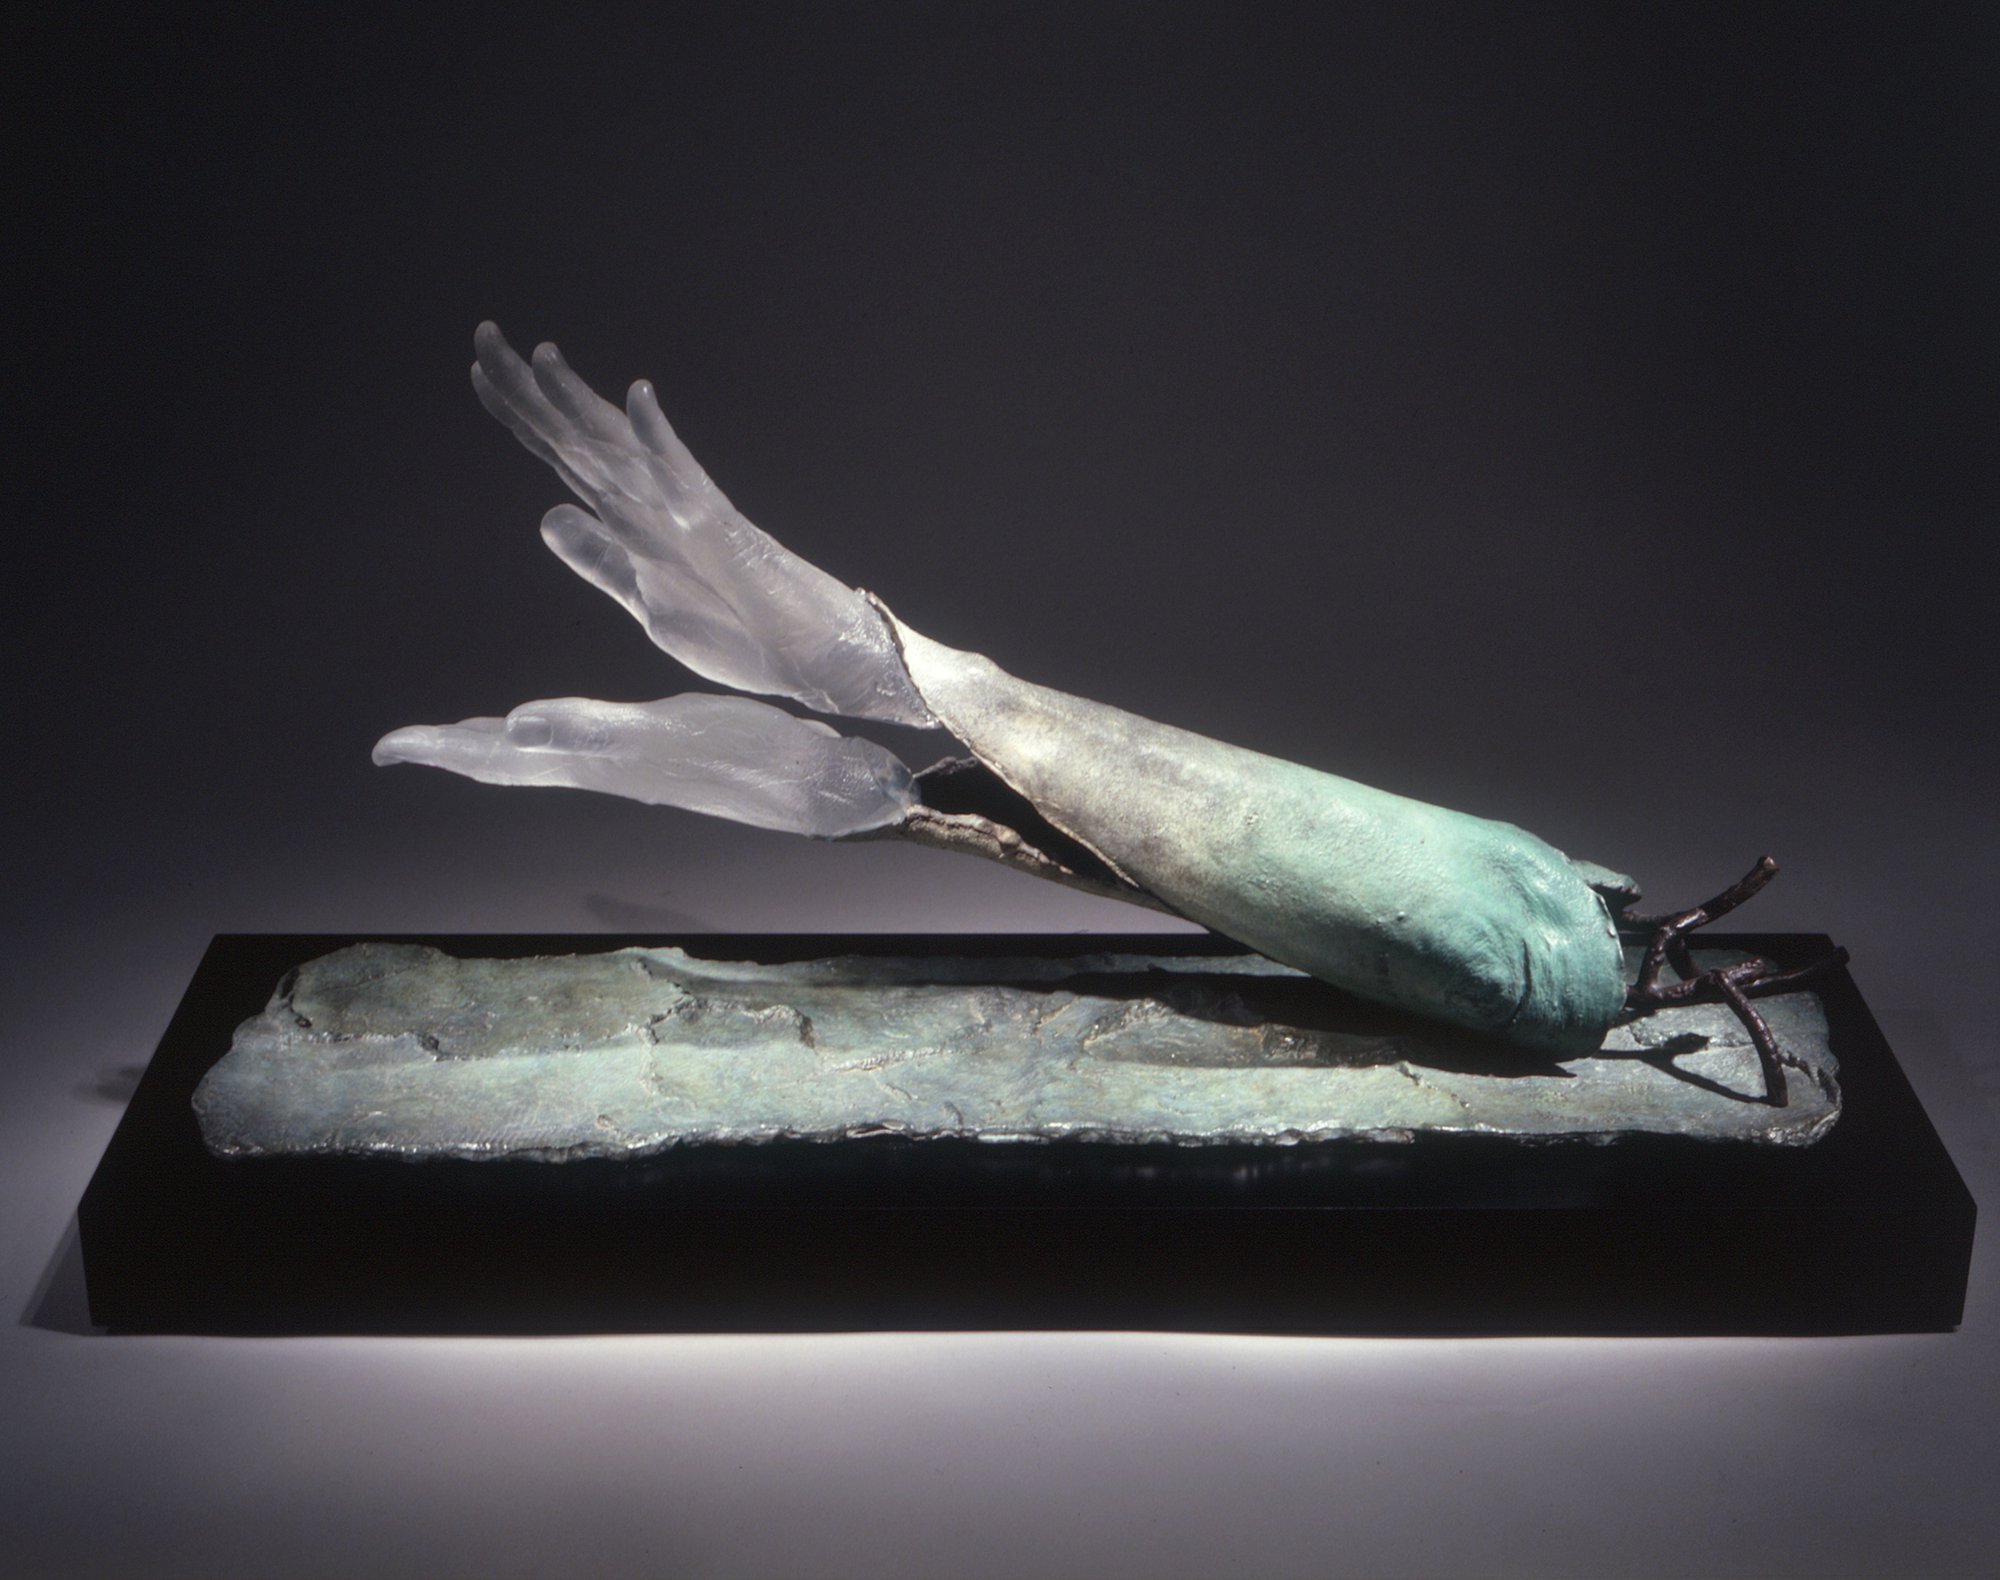 Liliane Lijn, She Me Skin of the Tree, Ayres Rock Gum tree bark cast artist’s arm and hand, patinated bronze, cast glass, 27 x 63.5 x 16.5 cm (10 5/8 x 25 x 6 1/2 in), 1999